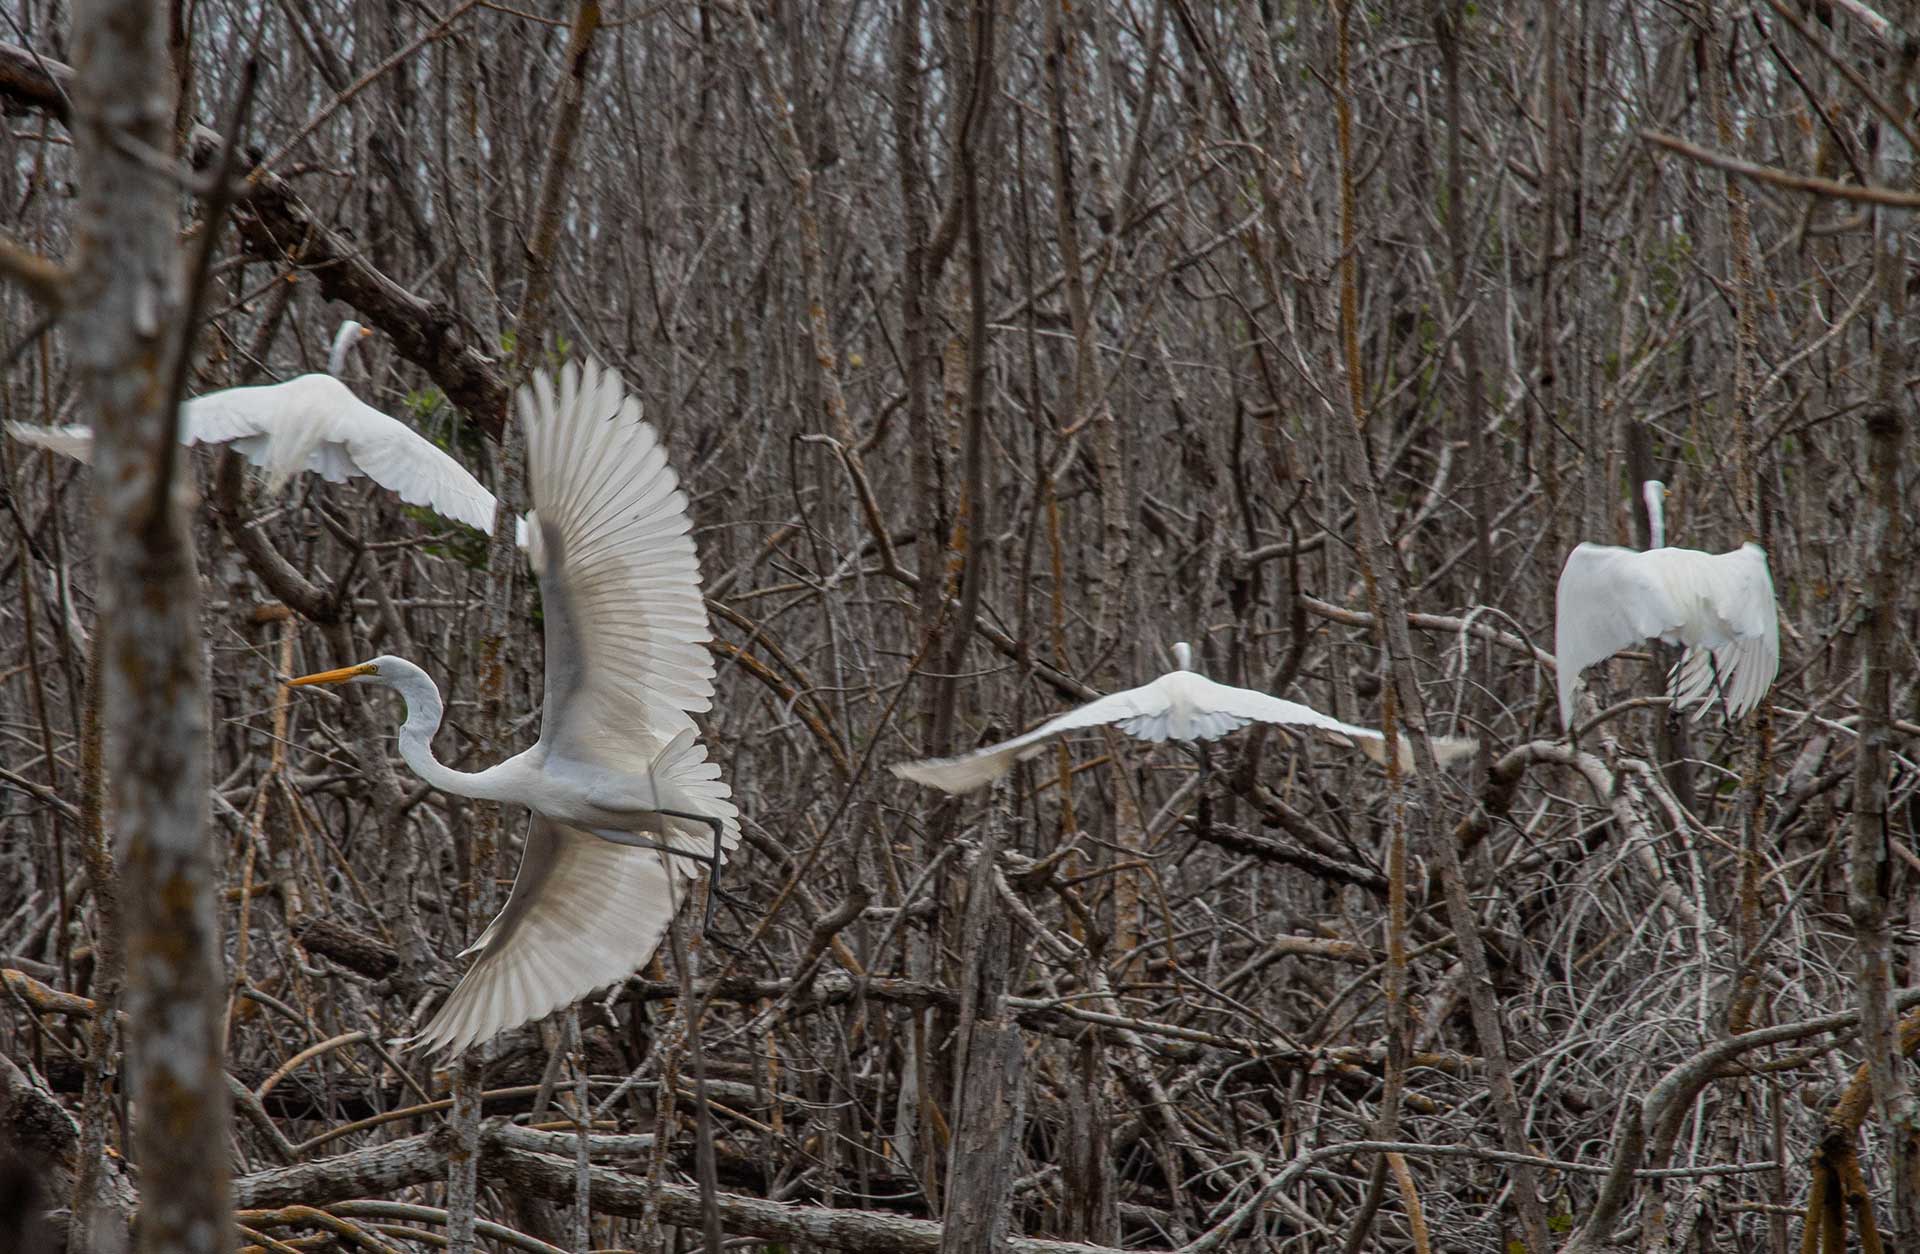 Four Great egrets with their wings spread, flying amongst dense tree branches